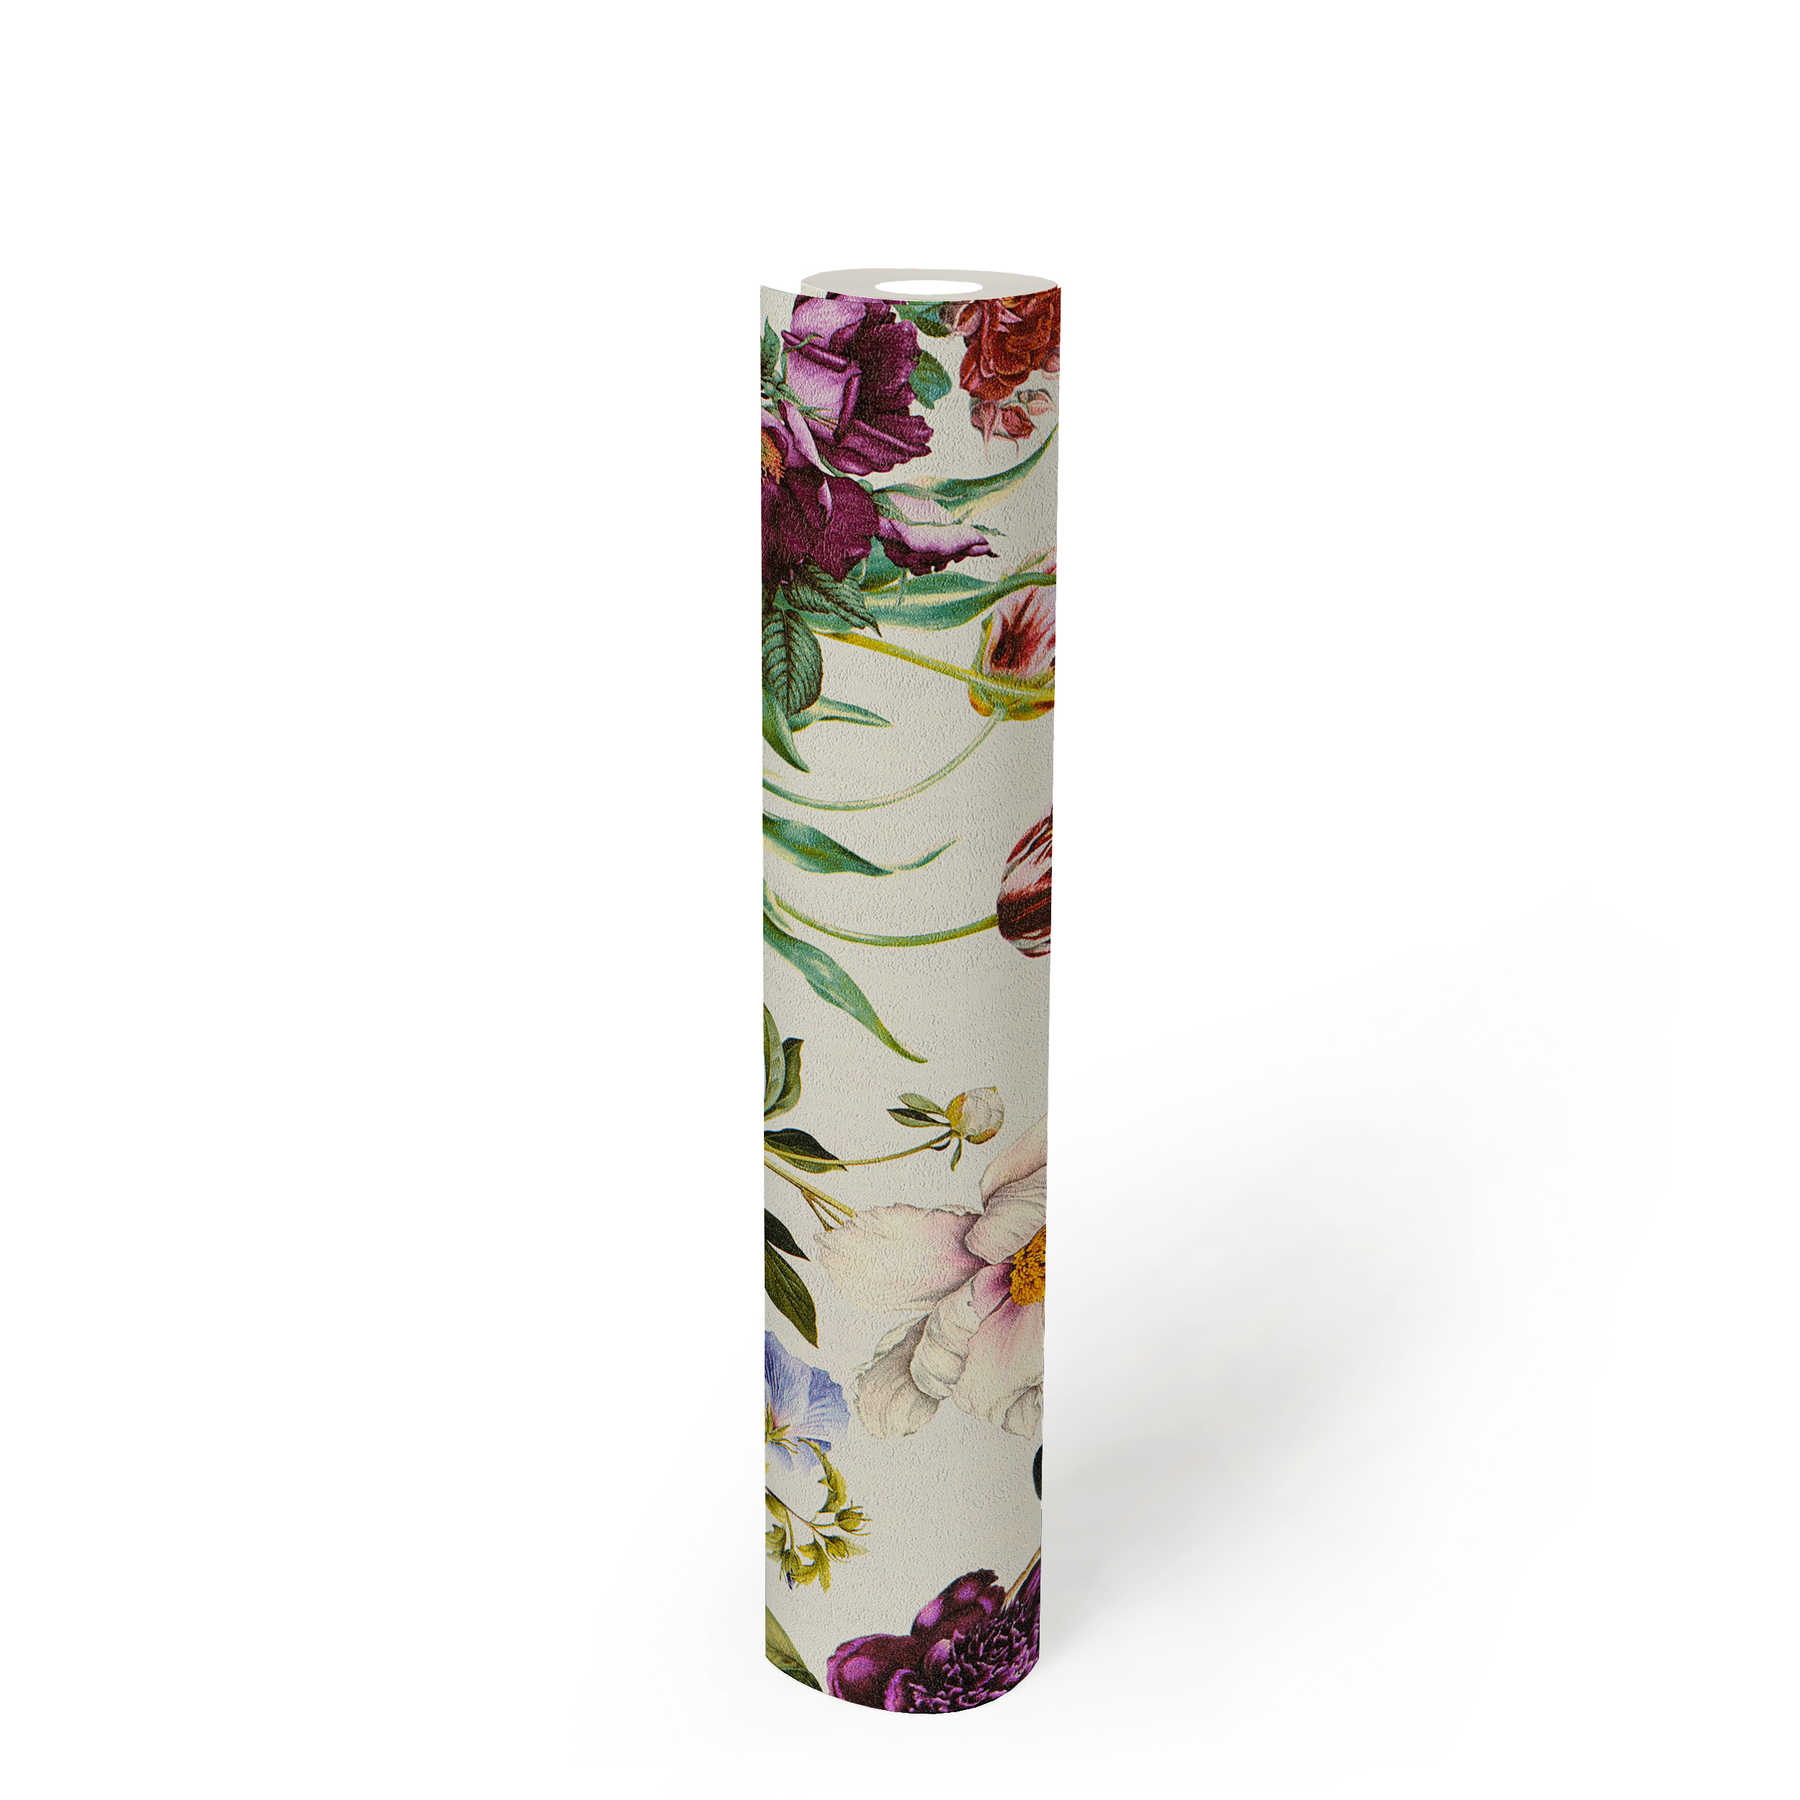             Floral wallpaper with flowers in bright colours - colourful, green, grey
        